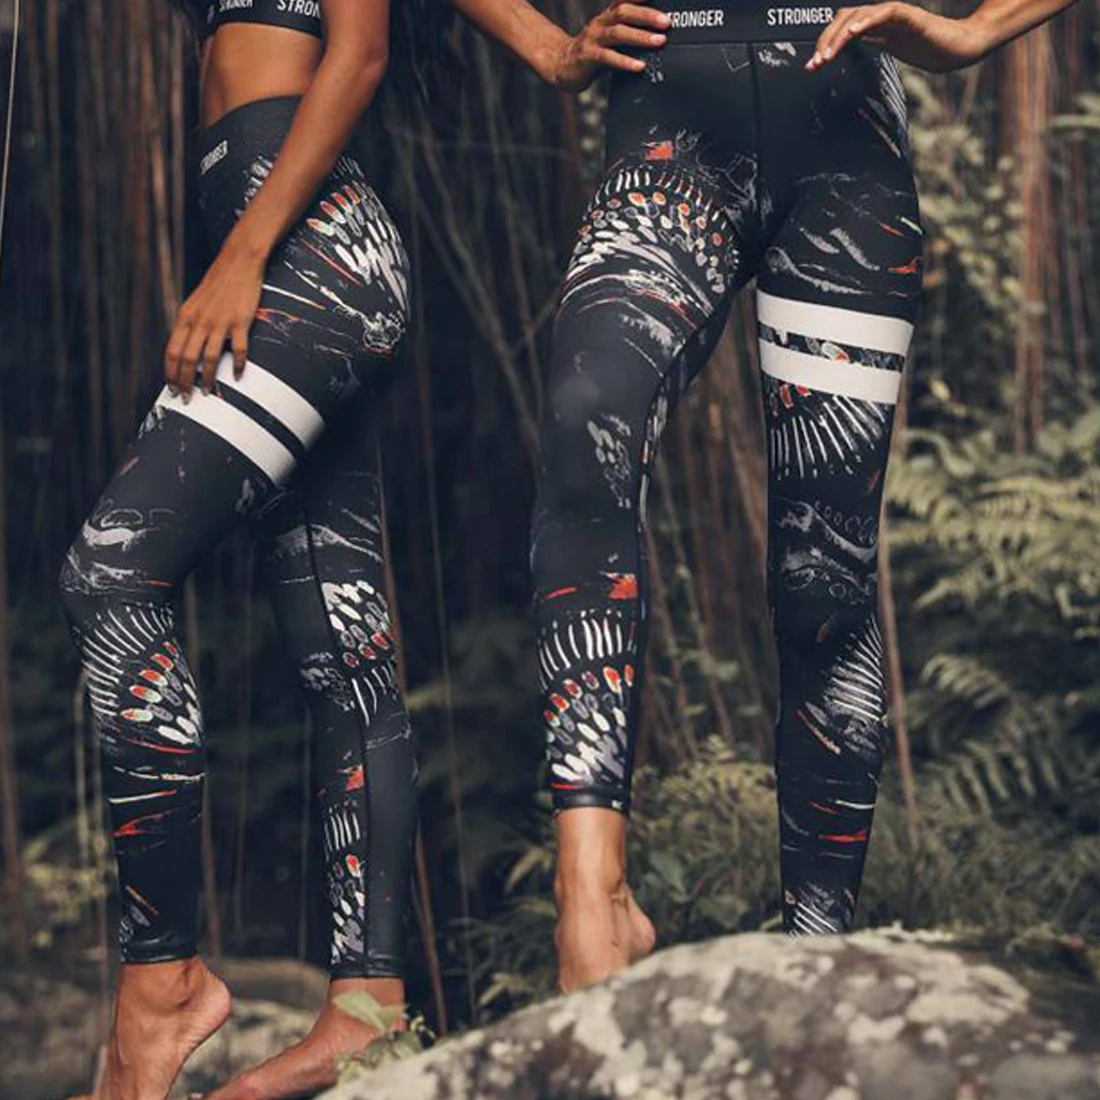 New Tribal totem Printed Women Leggings For Fitness High Waist Long Pants Hip Push UP Tights Gym Clothing | Женская одежда